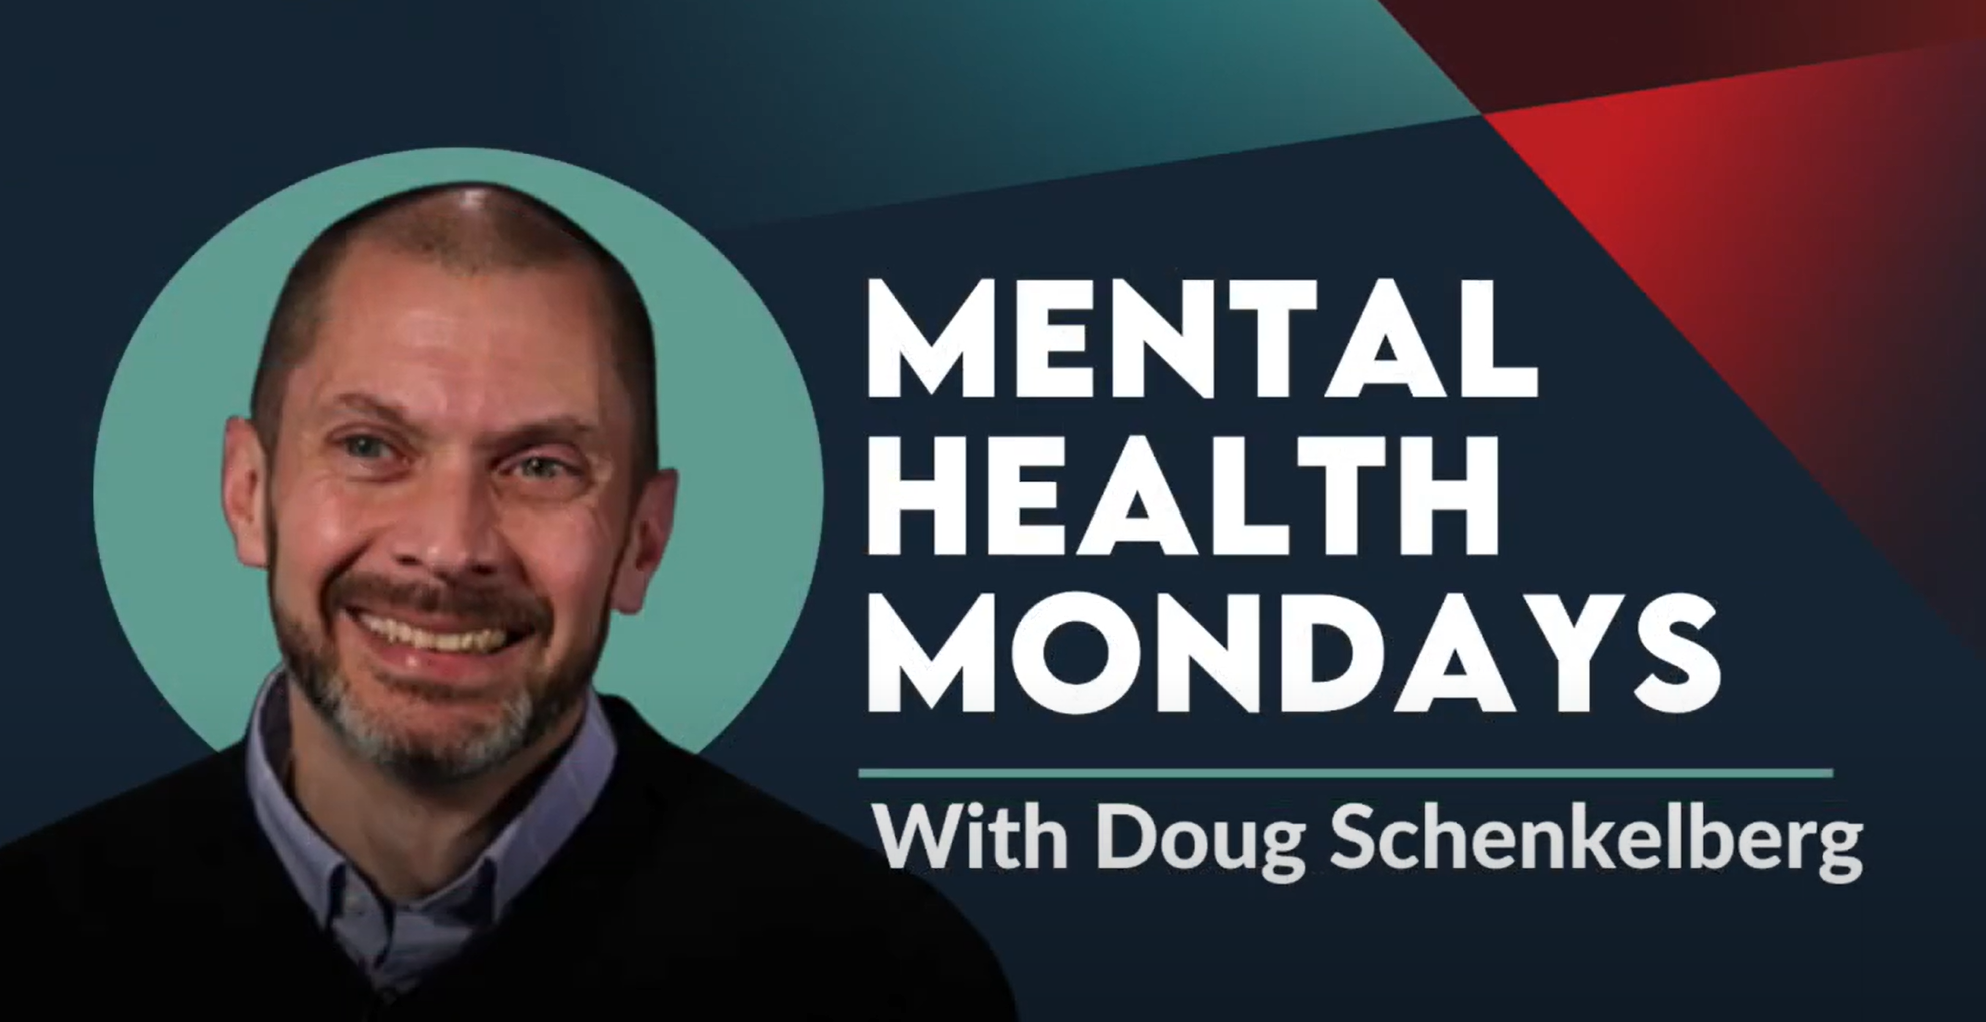 Right side of image shows CCH Executive Director Doug Schenkelberg smiling with the text "Mental Health Mondays" in large white capital letters to the right.